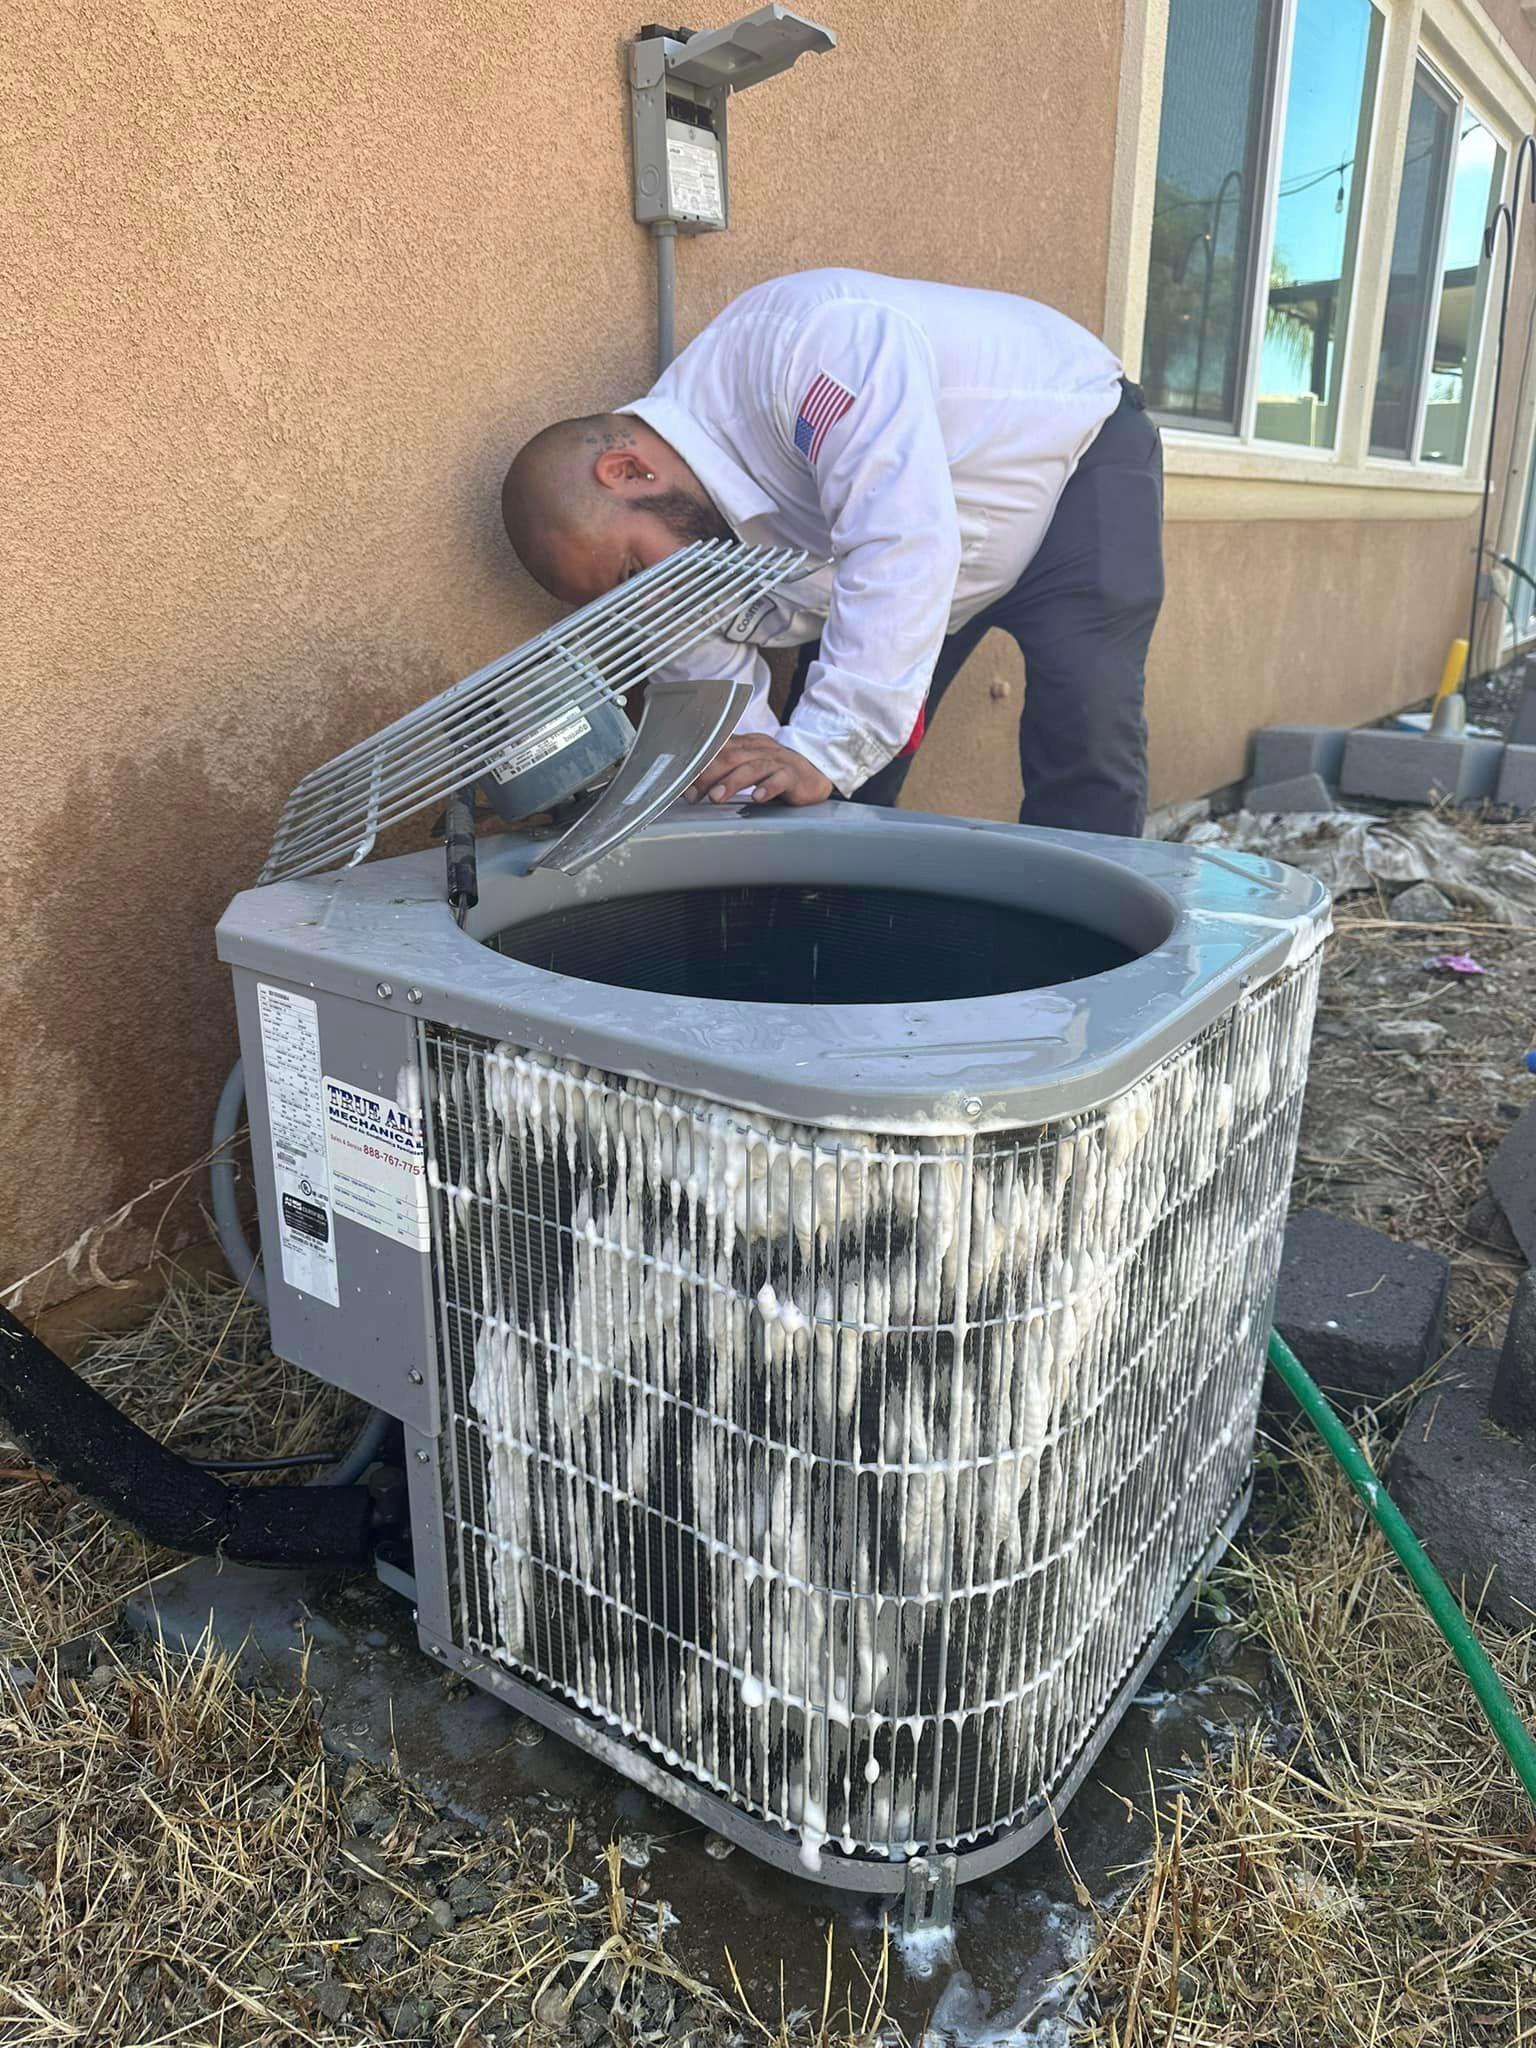 Customers of Luxurious Heating & Air Conditioning Inc appreciate the company's dedication to transparency, as they provide detailed estimates and explanations for all services, making sure clients have a clear understanding of the work being done.